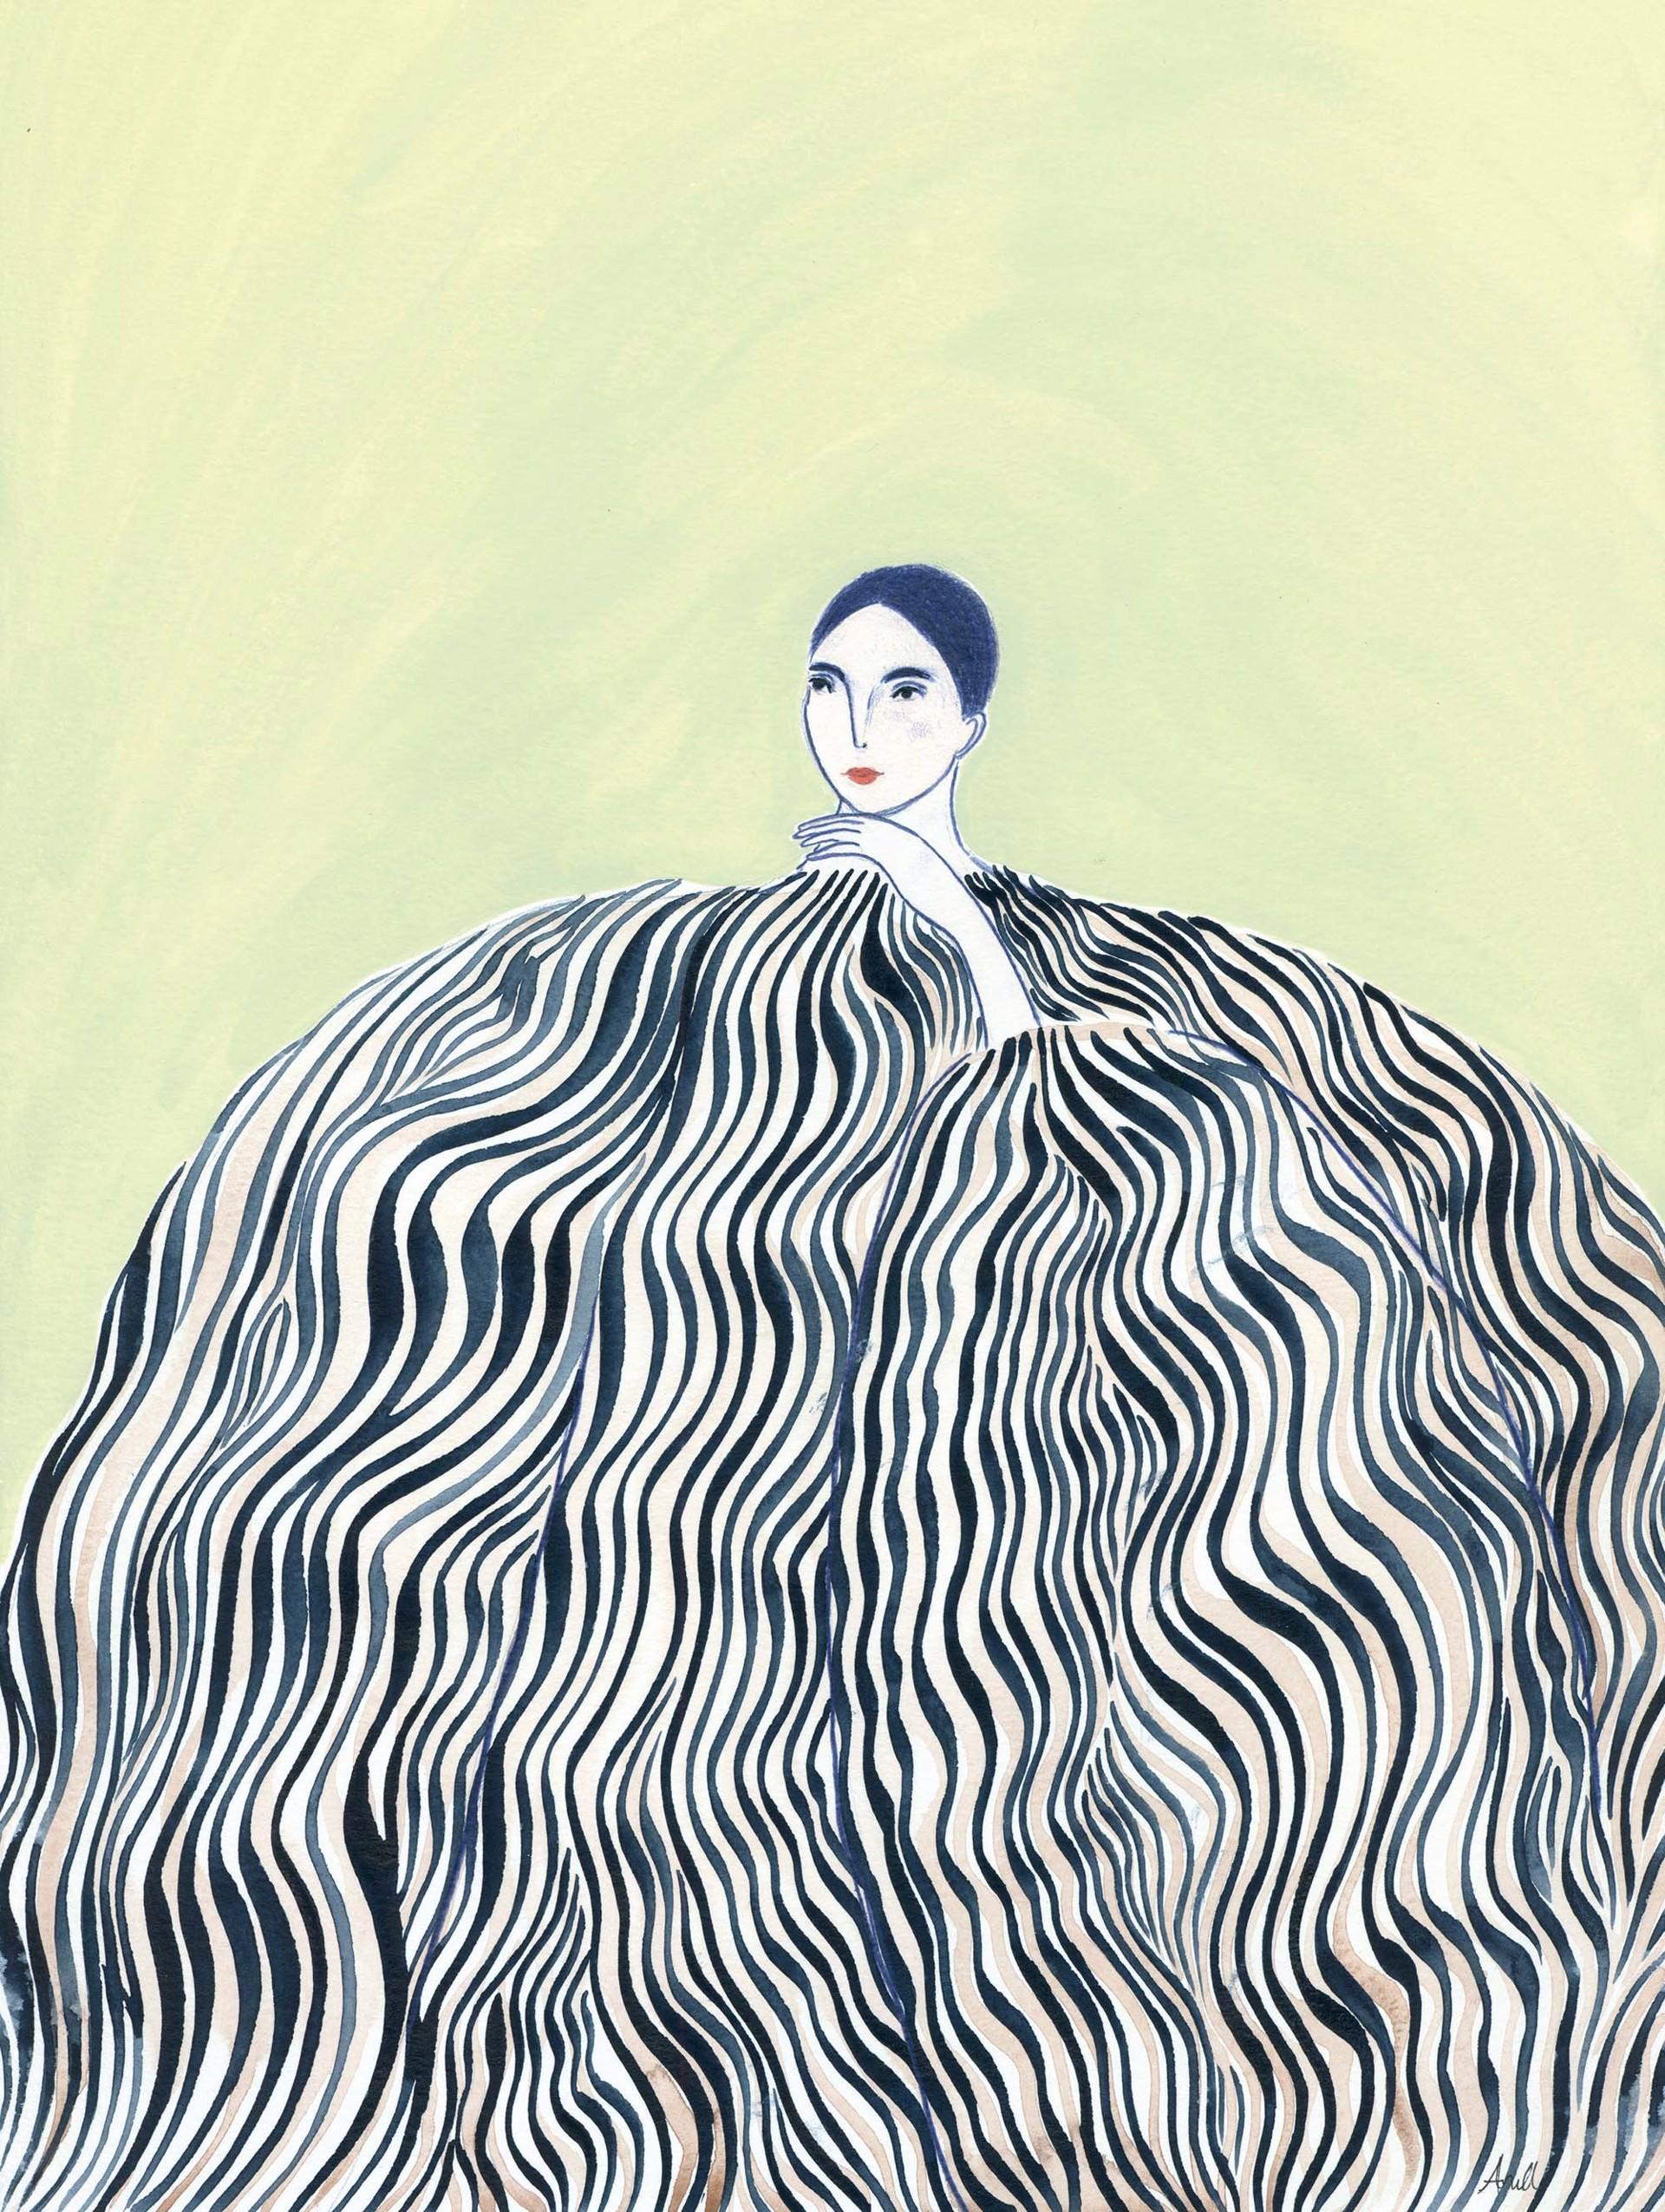 Anine Cecilie Iverson Abstract Drawing - Zebra Coat, painting & illustration, florals & nature, green black & white